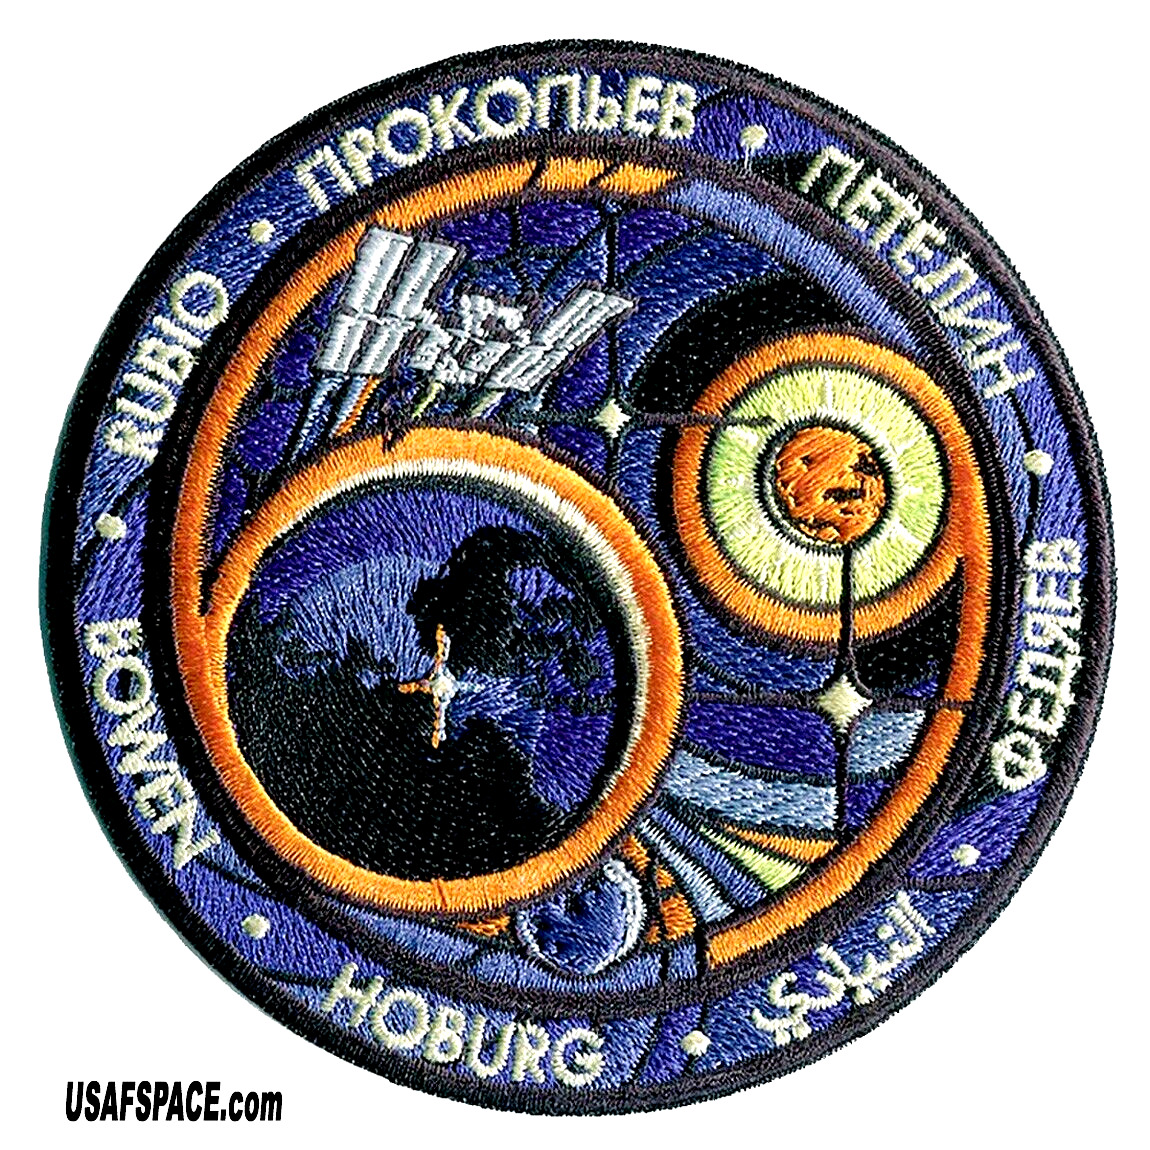 Authentic Expedition 69 -NASA SPACEX ISS Mission- A-B Emblem SPACE PATCH W/Names